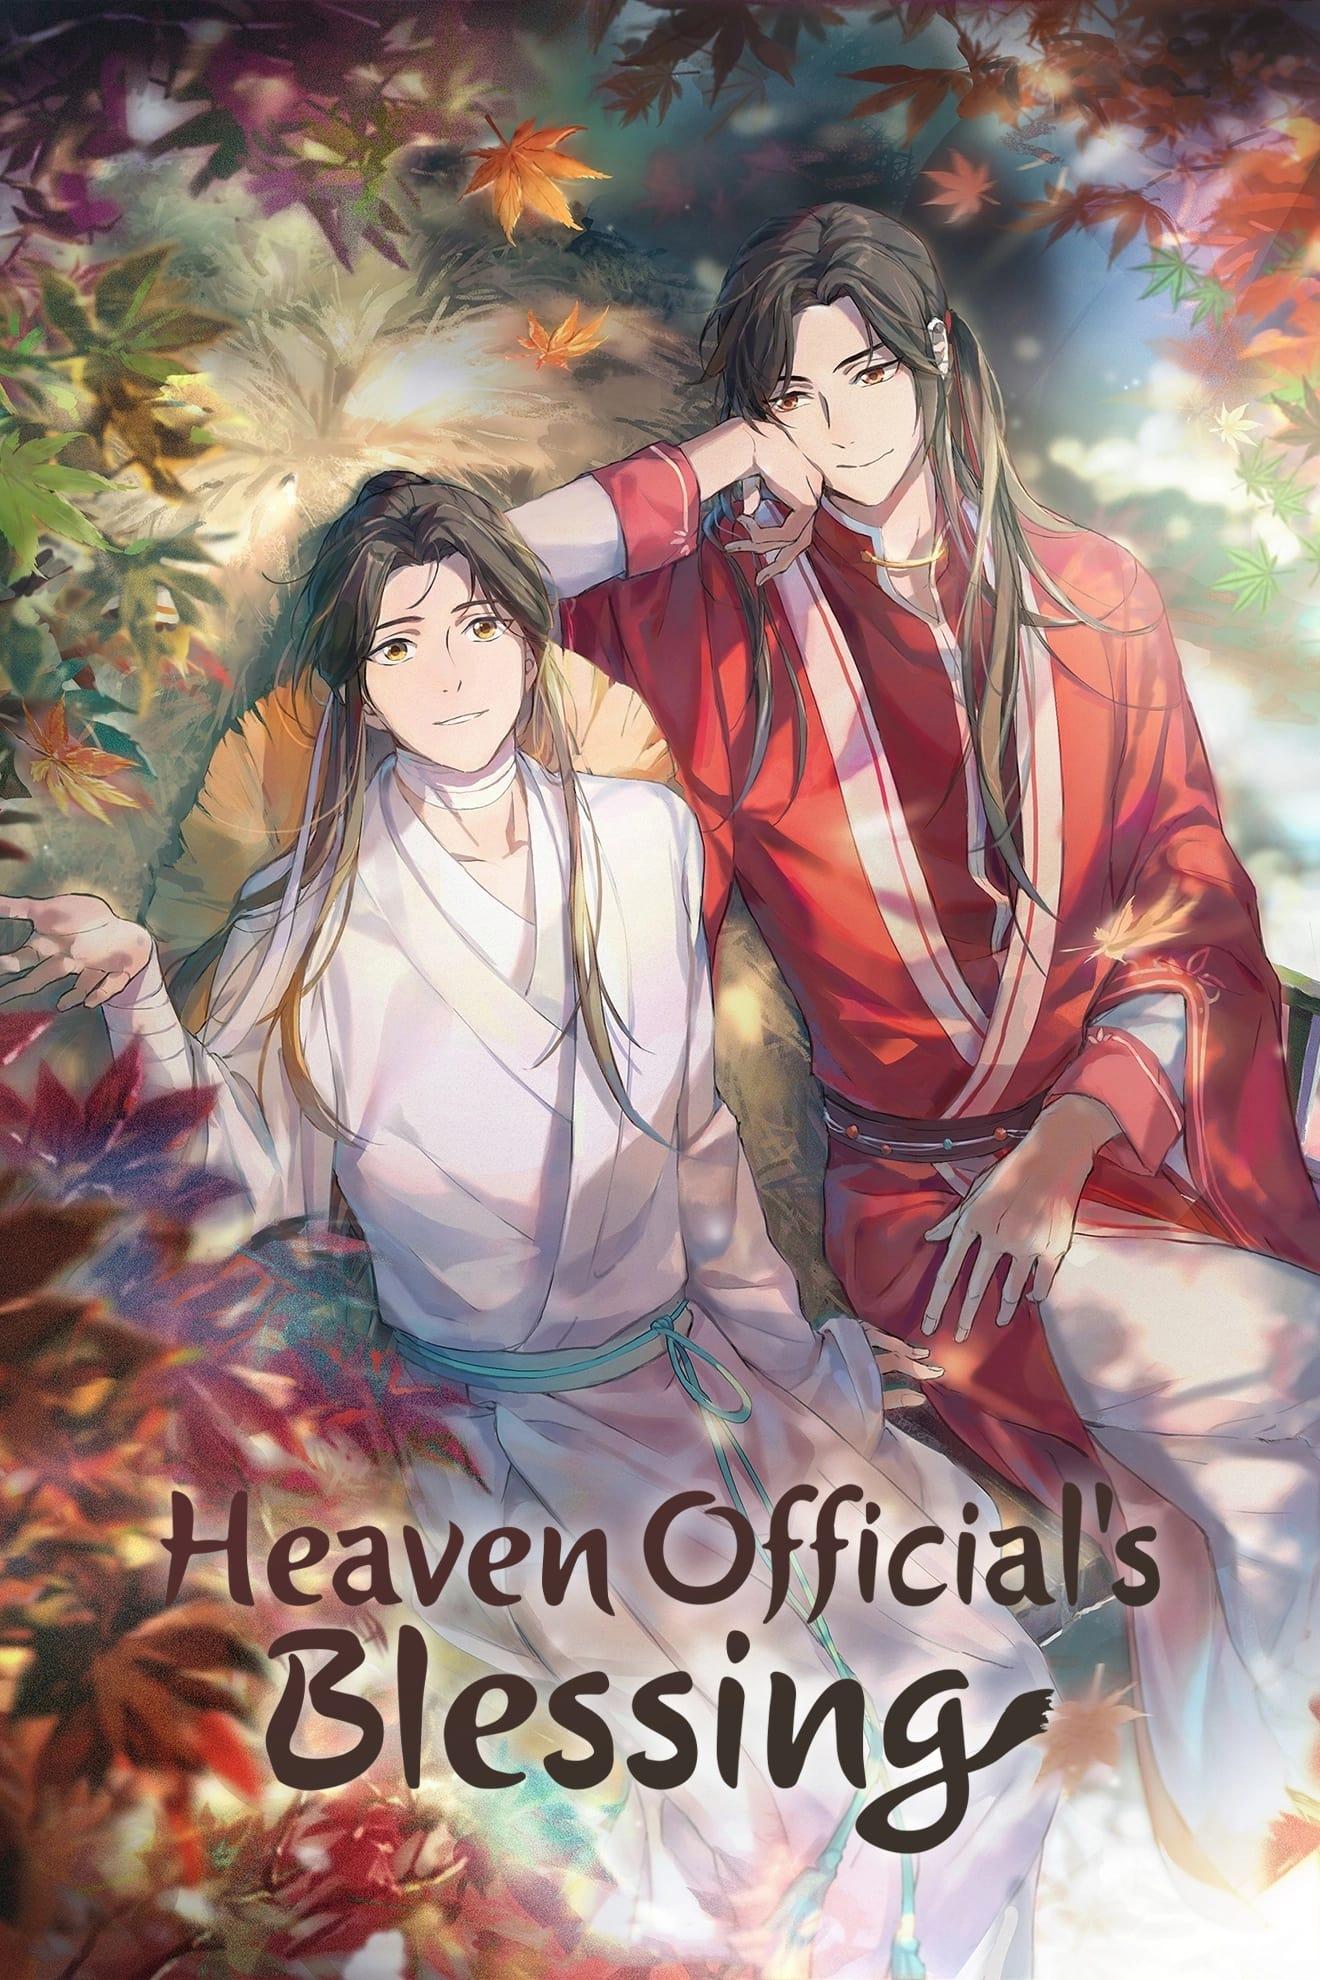 Heaven Official's Blessing poster